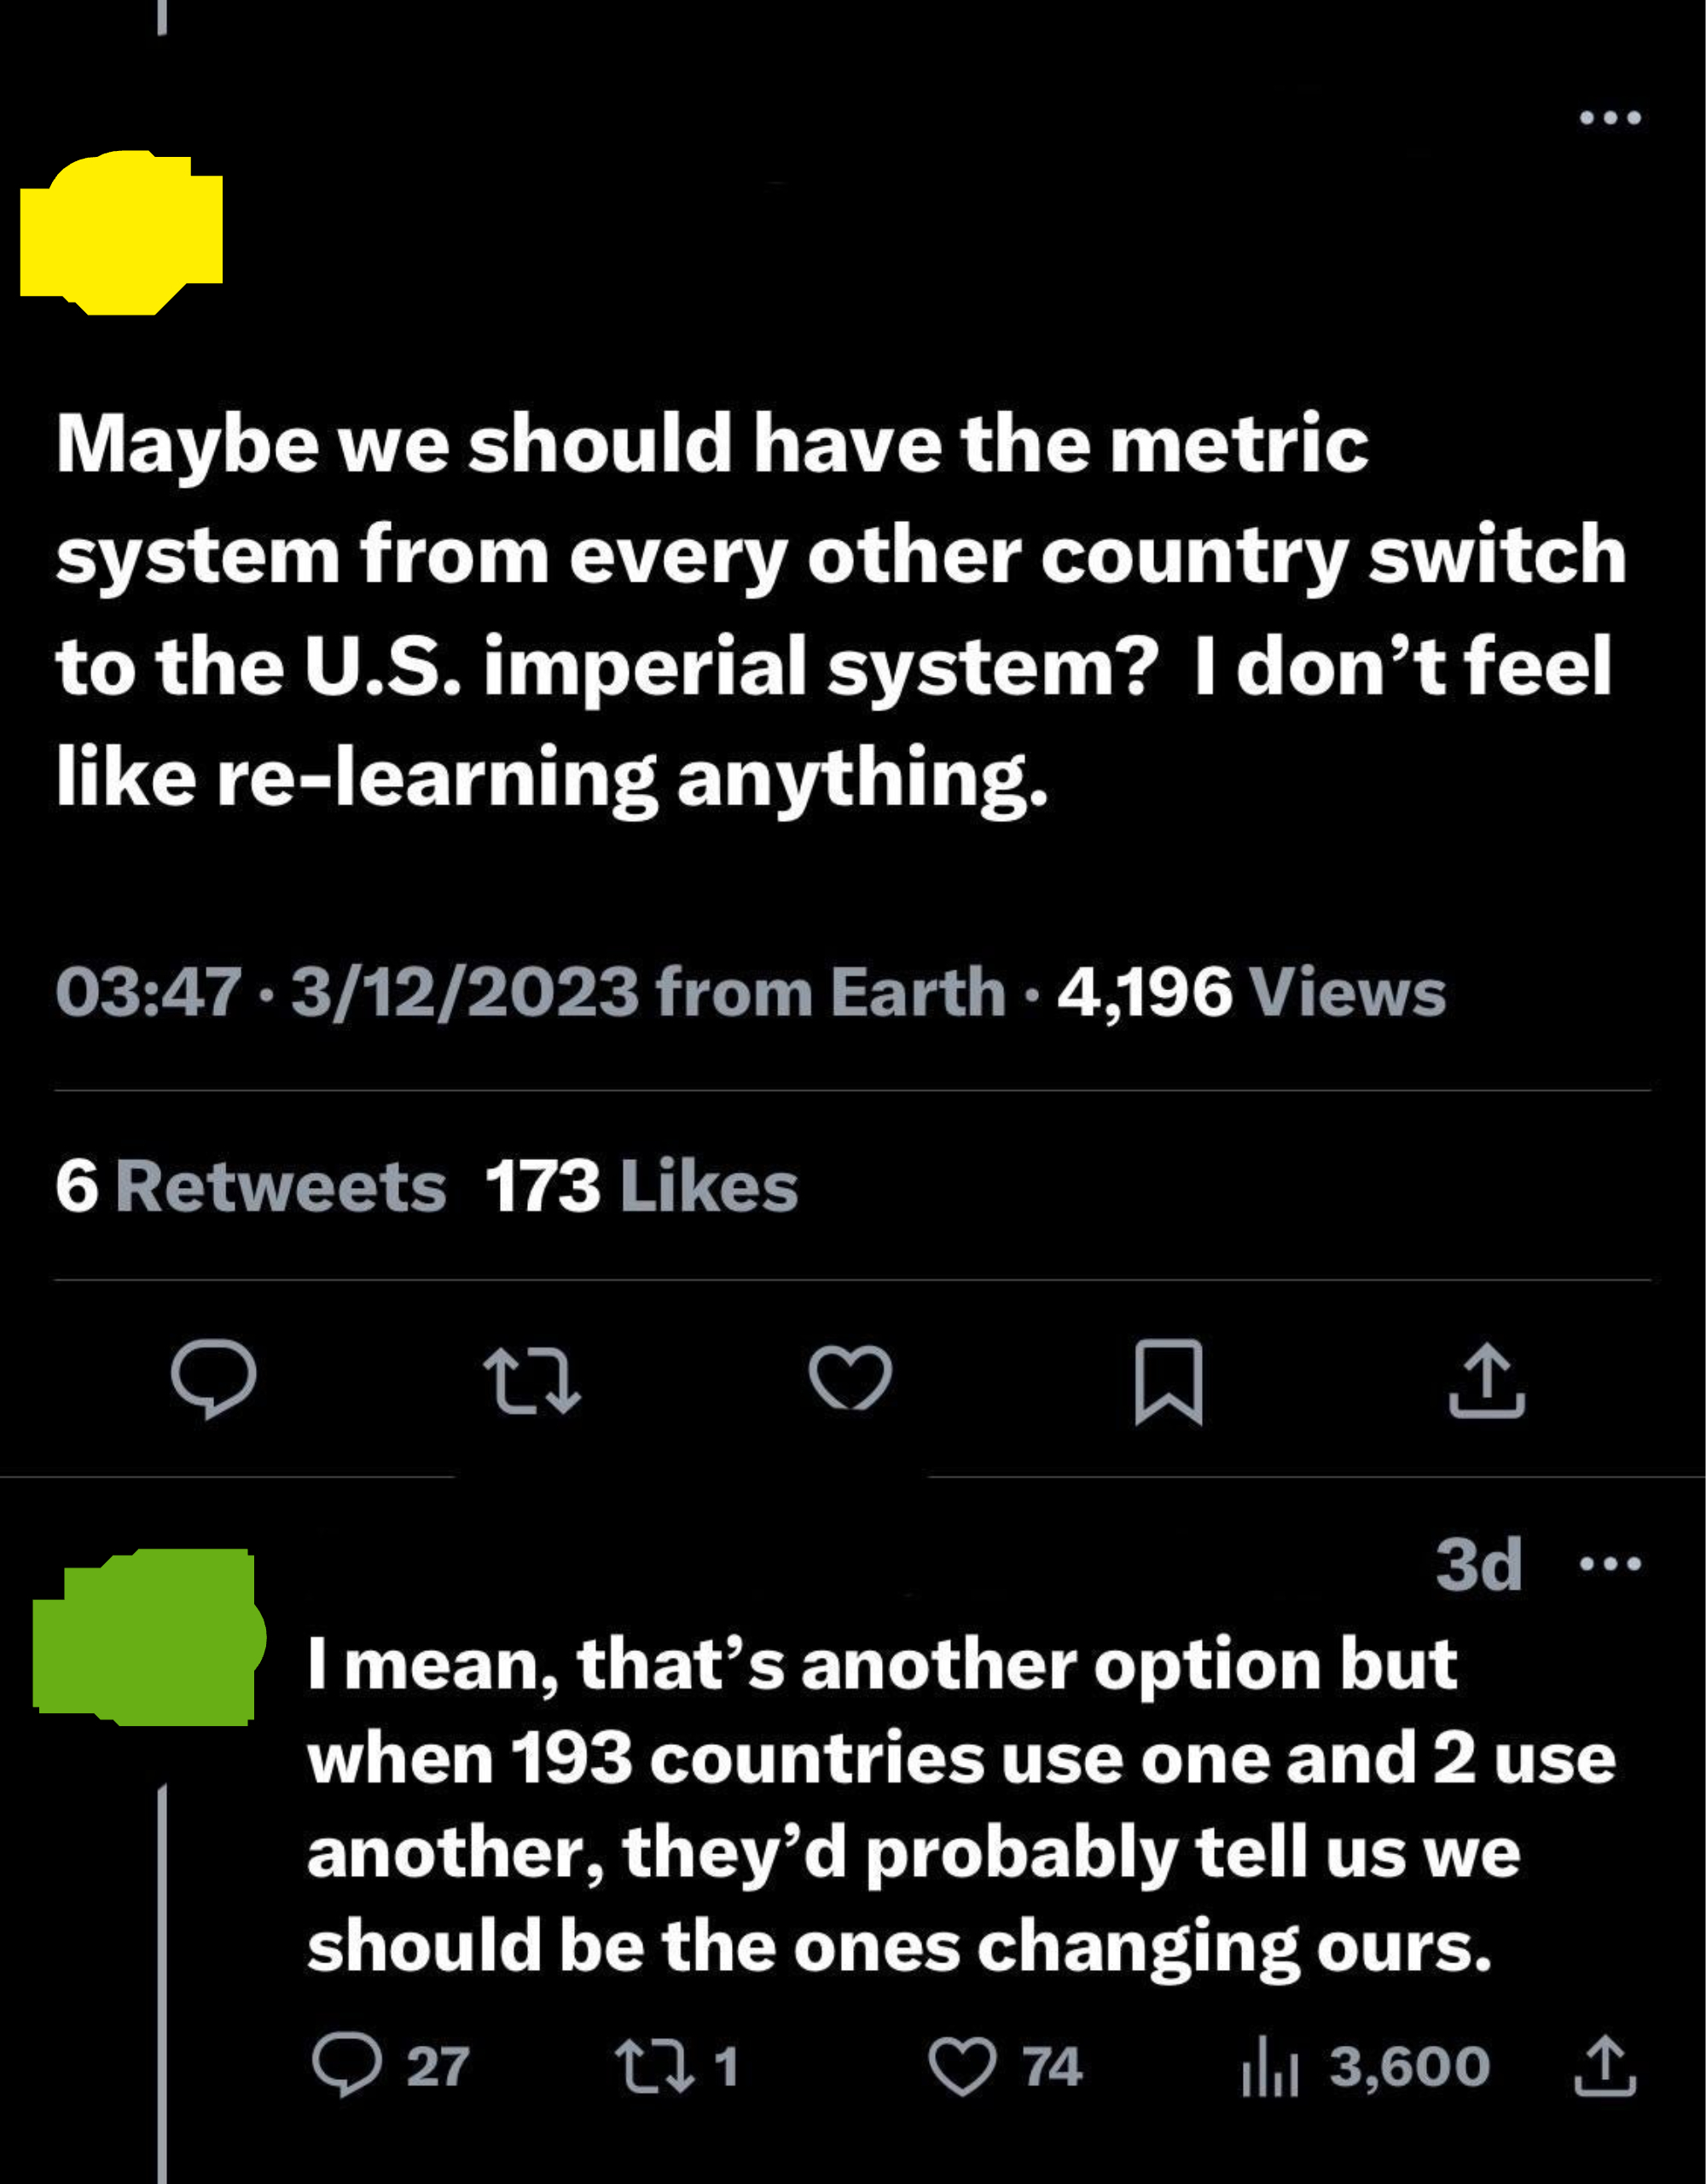 &quot;Maybe we should have the metric system from every other country switch to the US imperial system? I don&#x27;t feel like relearning anything&quot; and &quot;When 193 countries use one and 2 use another, they&#x27;d probably tell us we should be the ones changing ours&quot;